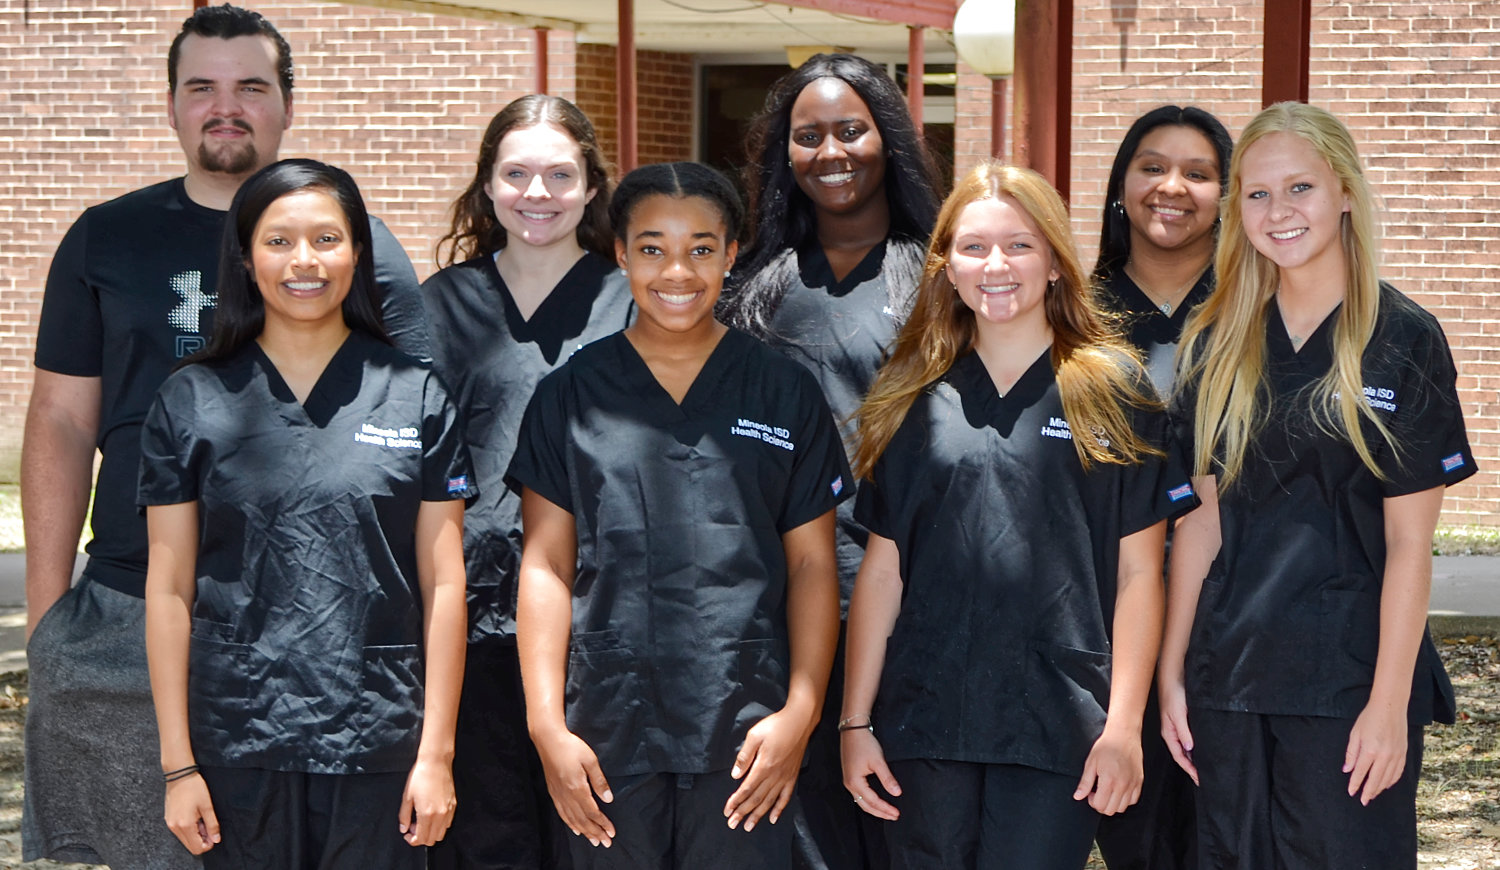 Mineola High School students achieving national medical certifications this year include, back from left, Dawson Elmore, Riley Johnson, Tiara Stephens, Ana Cruz; and, front, Kate Melgarejo, Abbie Kratzmeyer, Cyndi Butler and Kelsie Browning.